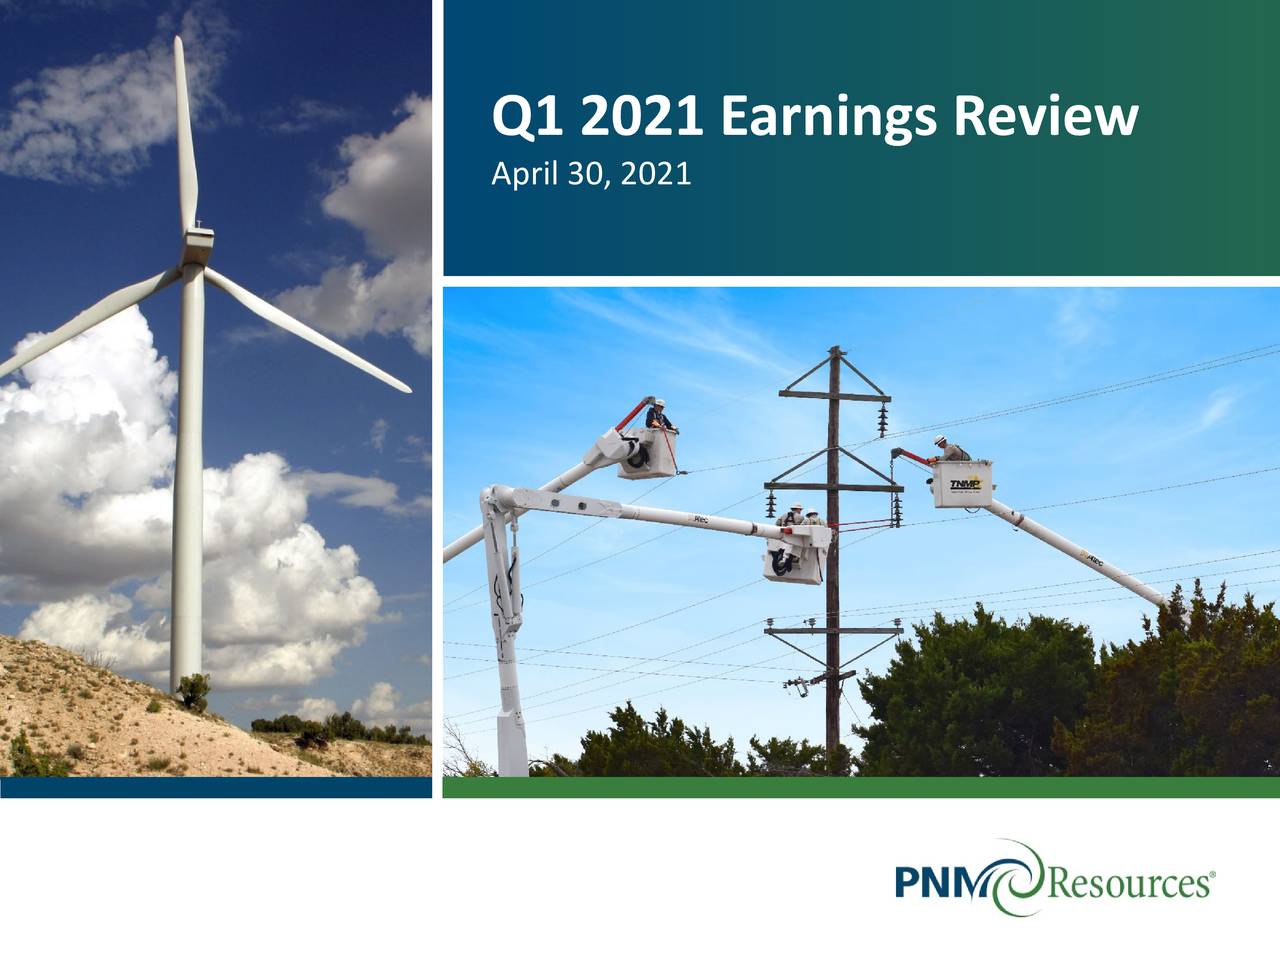 Q1 2021 Earnings Review